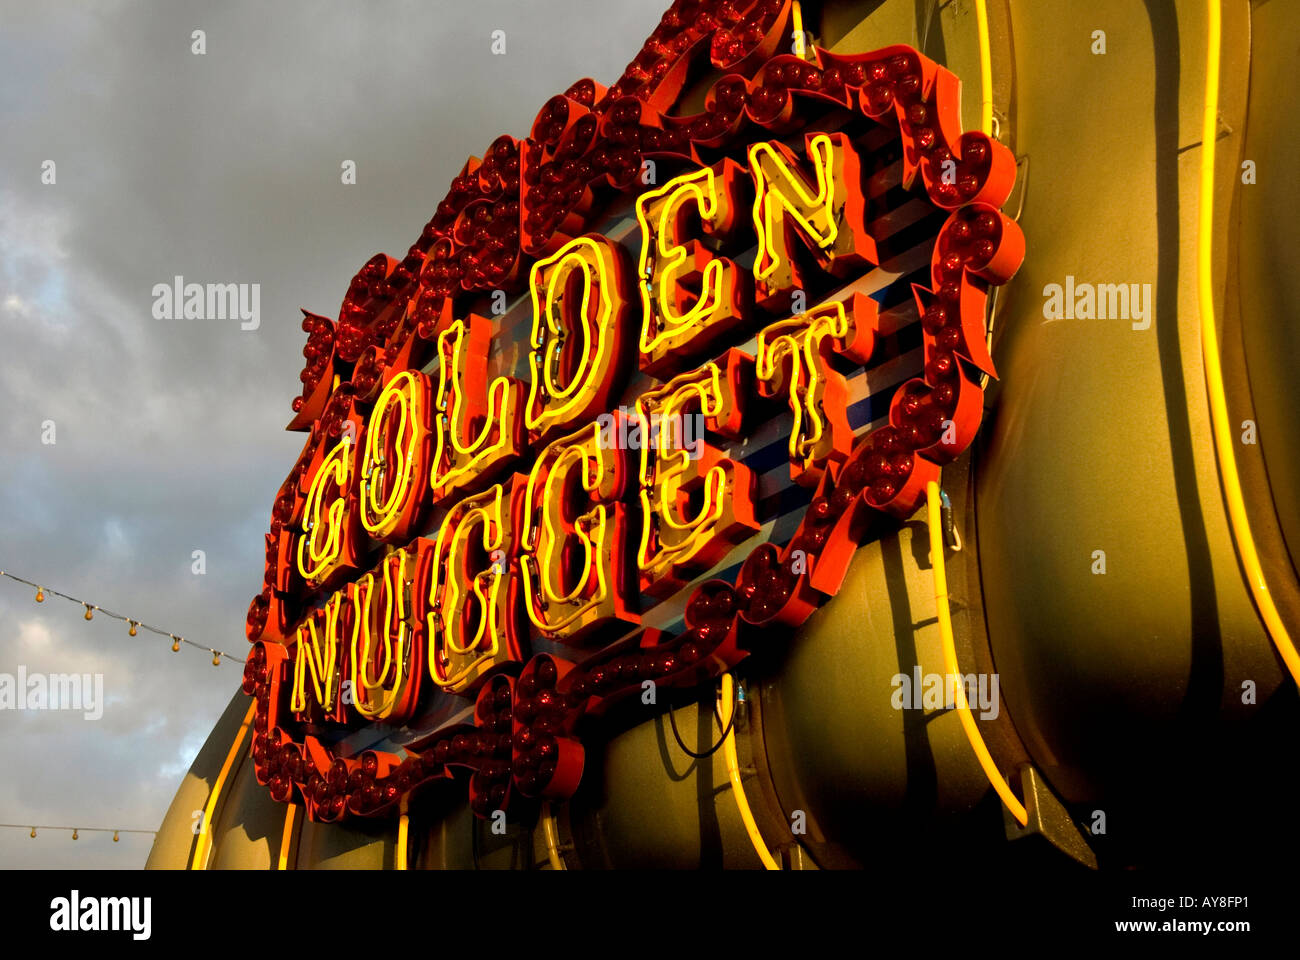 Golden Nugget Great Yarmouth Norfolk UK Banque D'Images